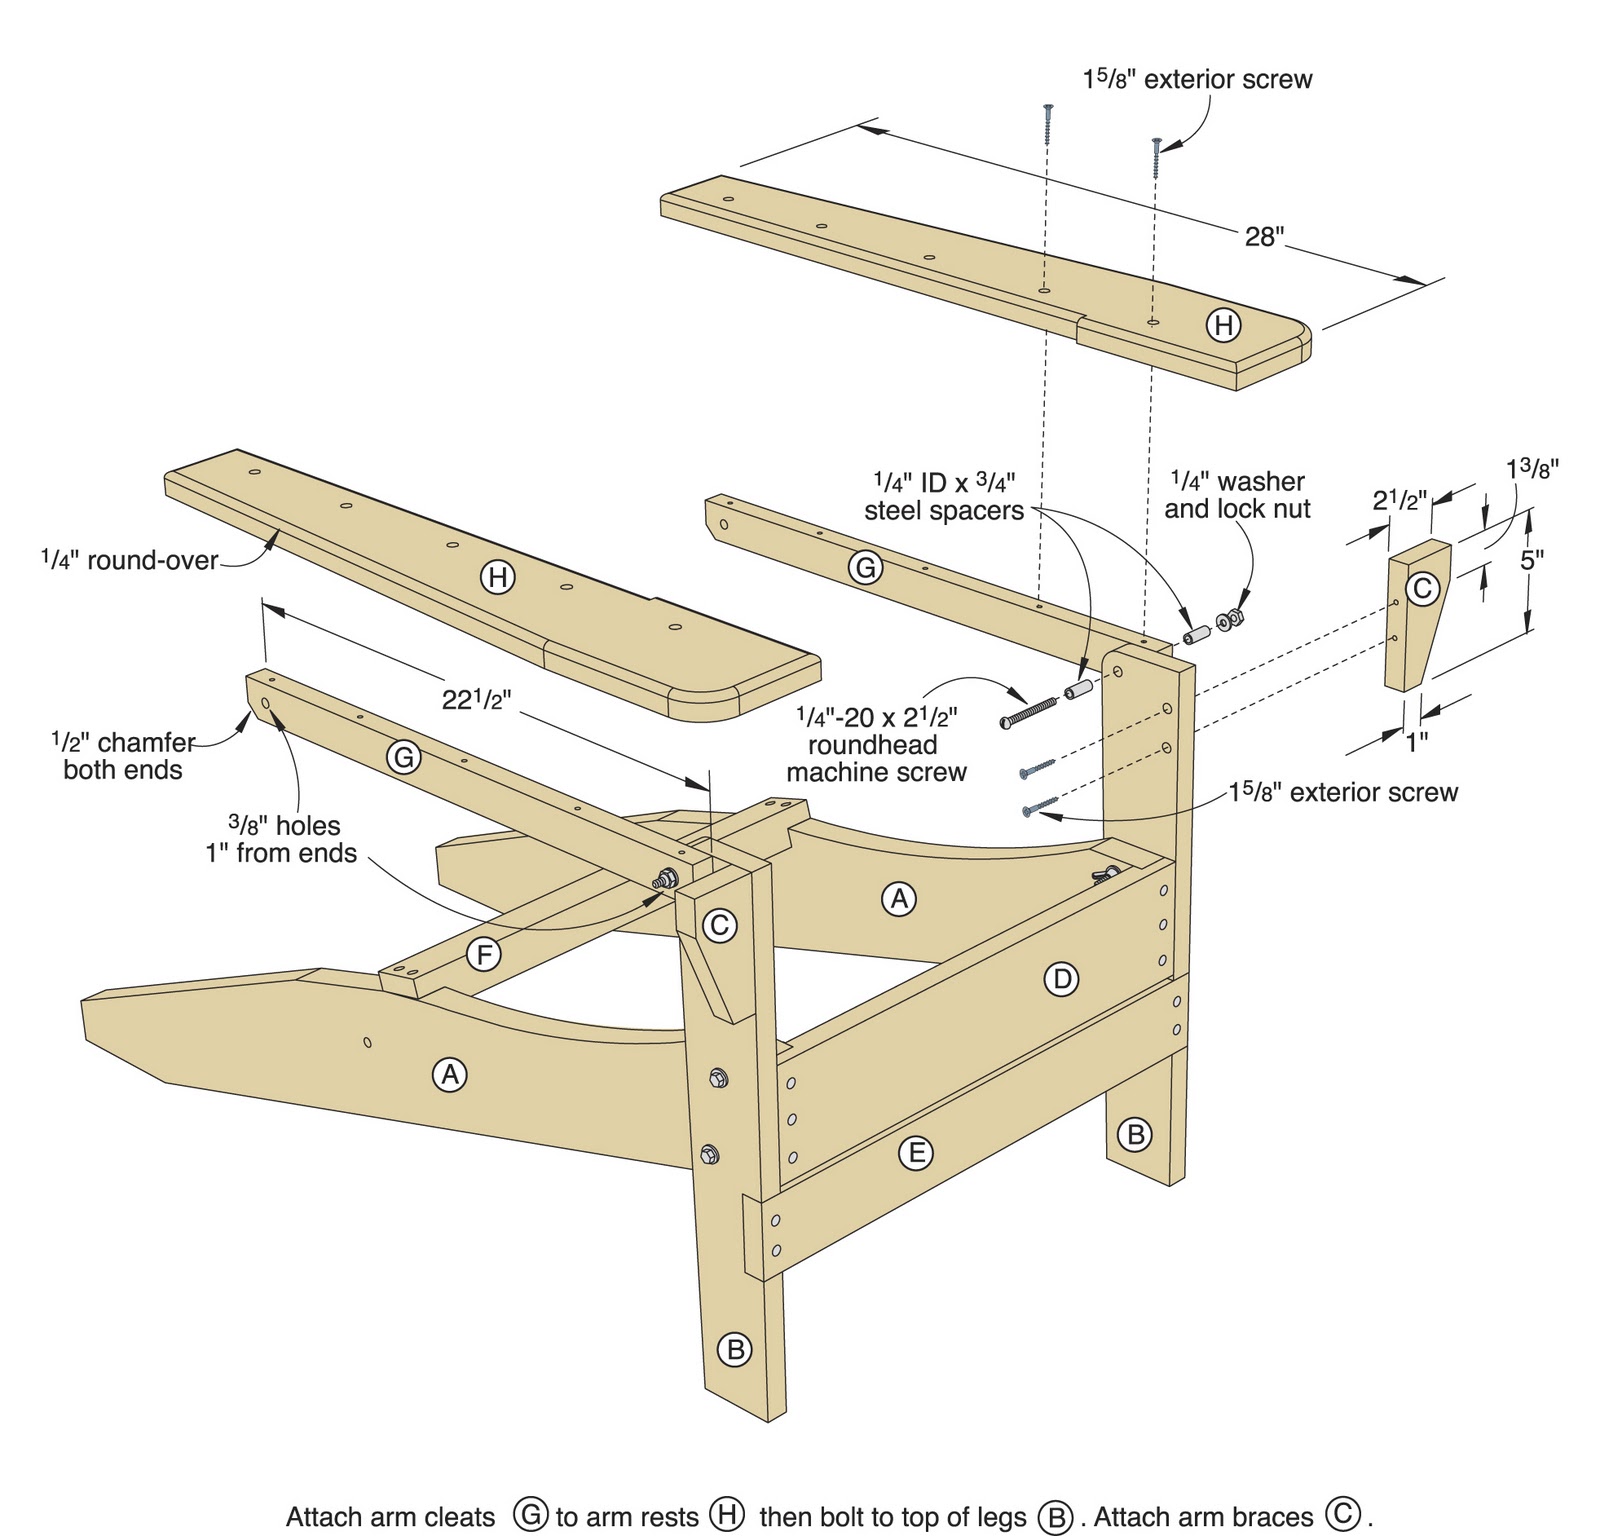 Wood Working Plans , Shed Plans and more: Folding ...